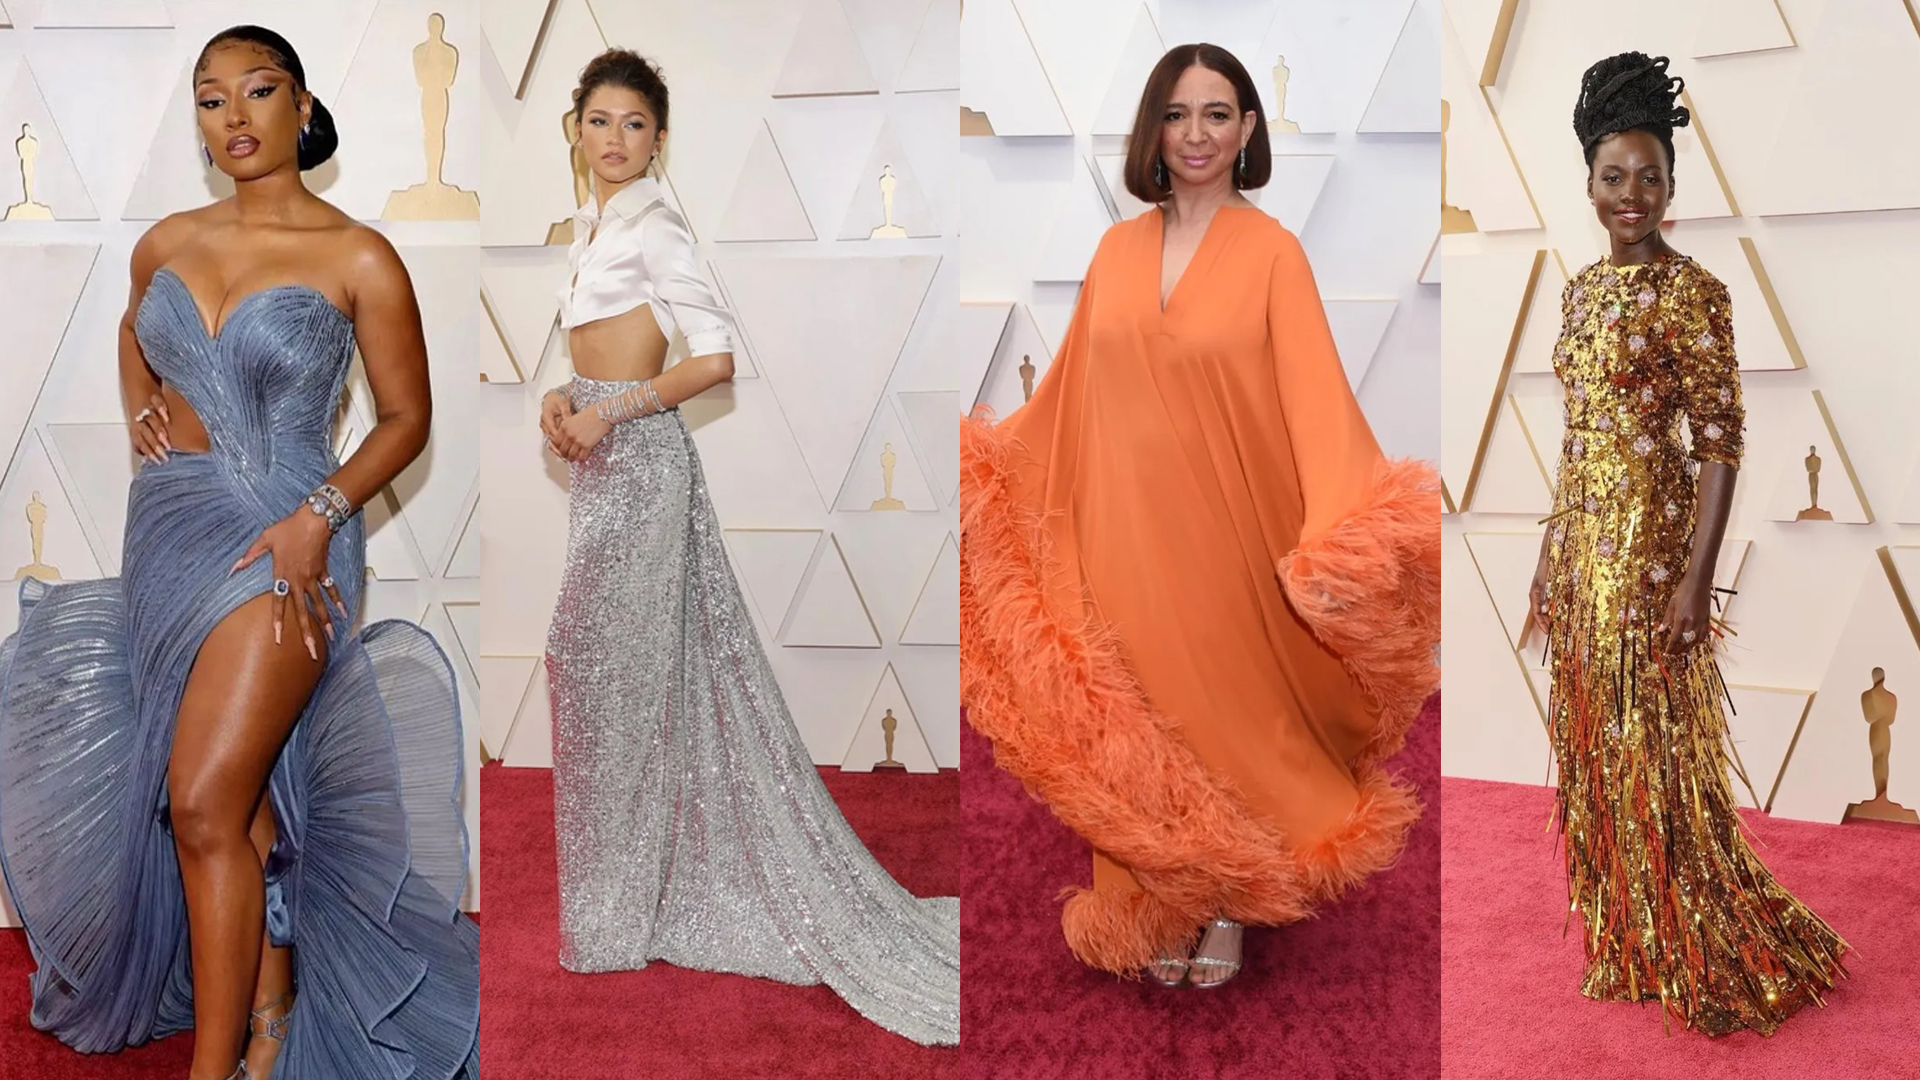 This year’s Oscar fashion was elegant and refined